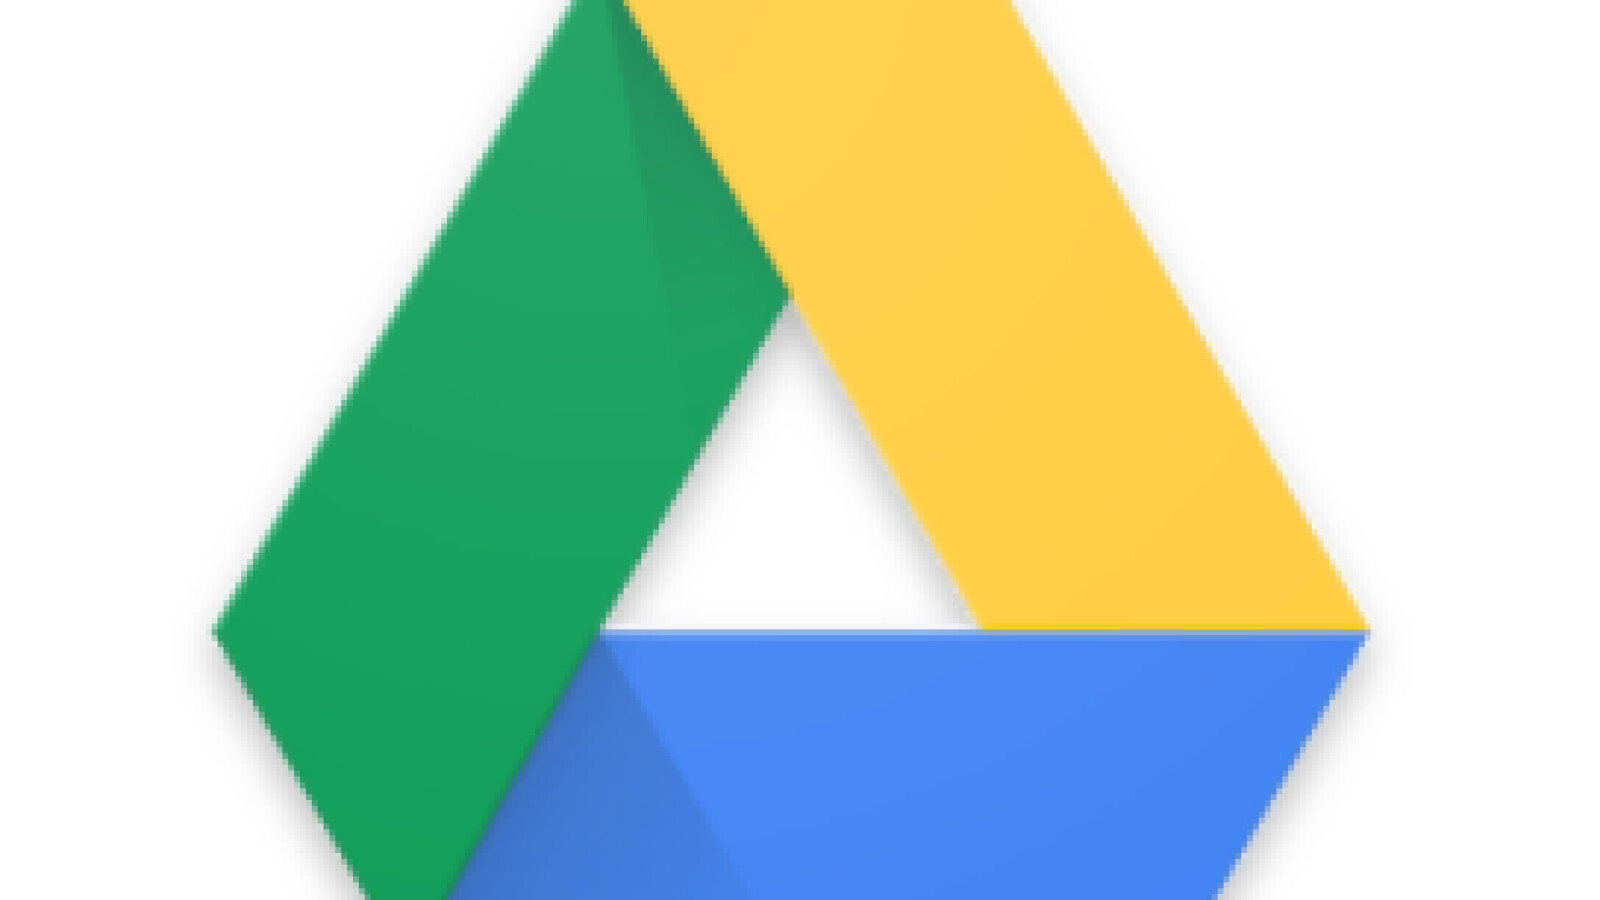 where does google drive download to